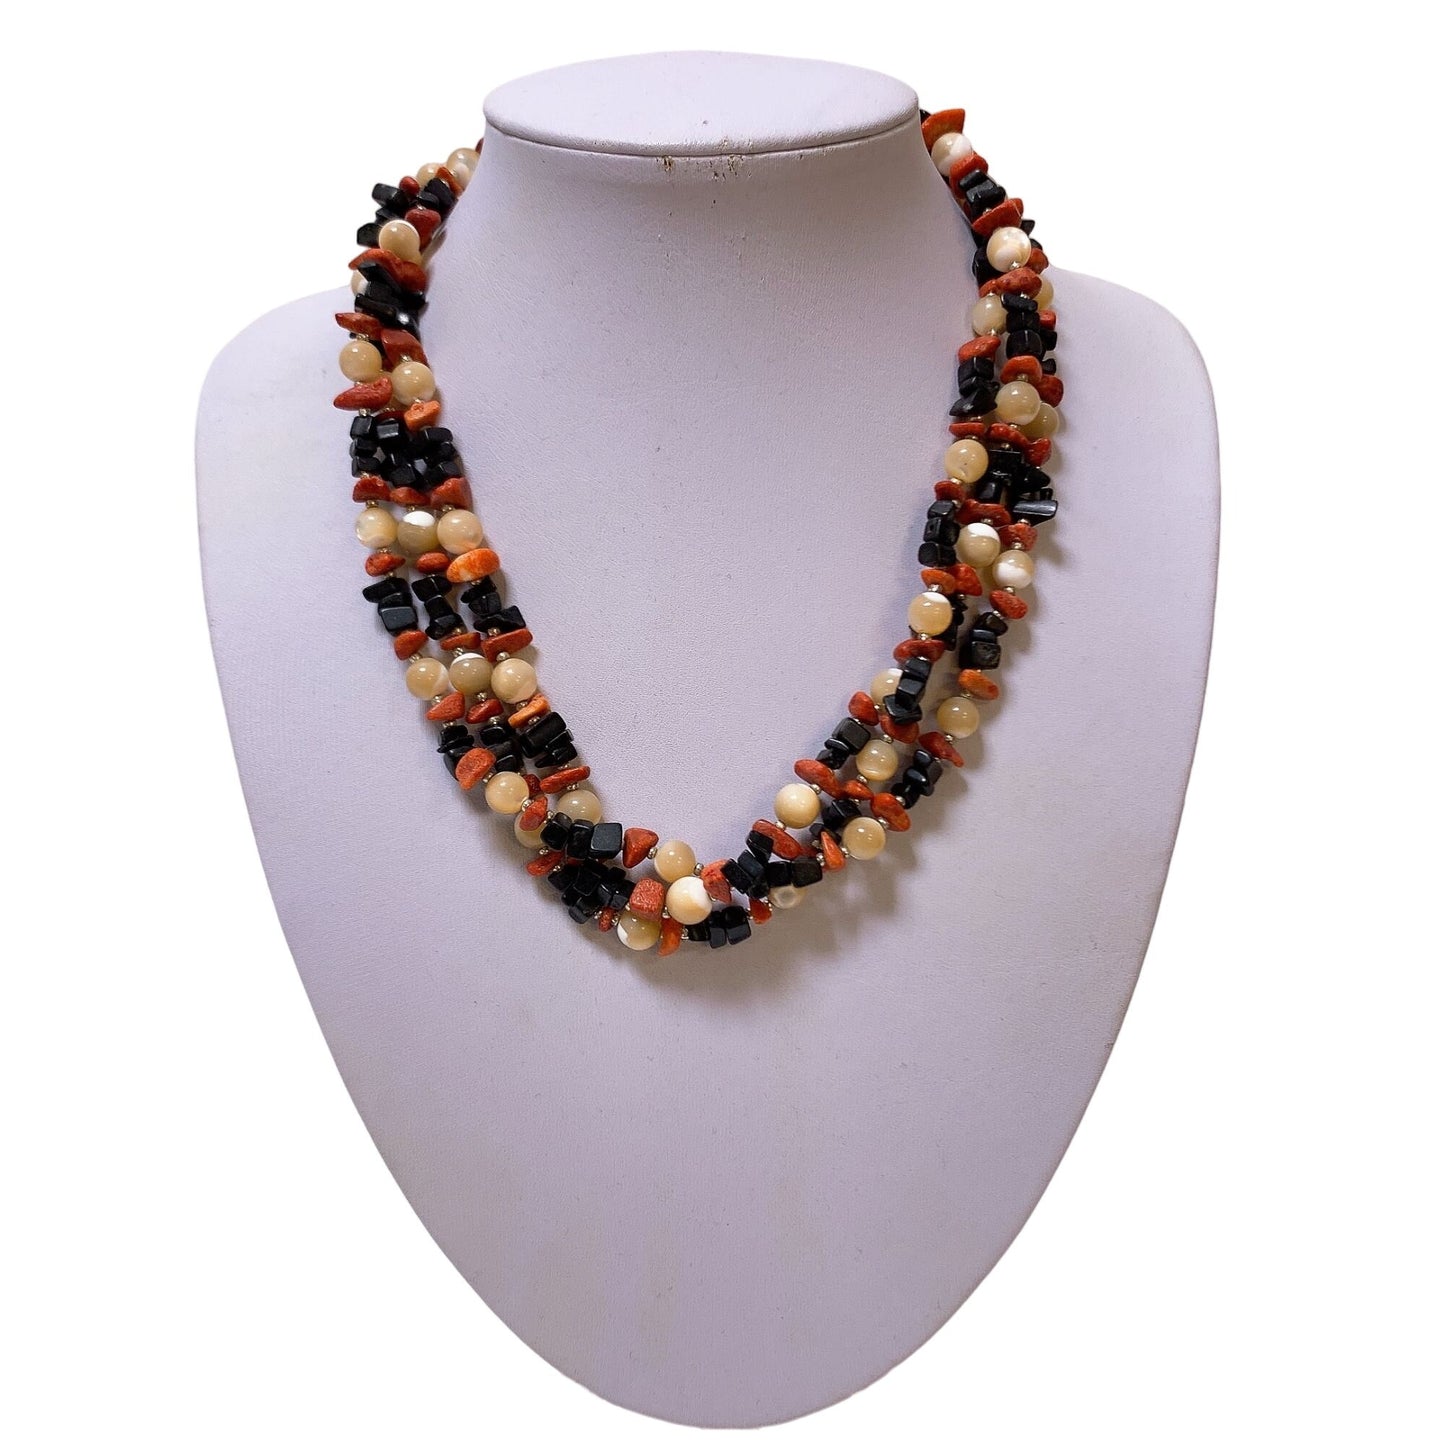 *.925 Mother of Pearl, Onyx and Red Jasper Triple Strand Necklace 18"